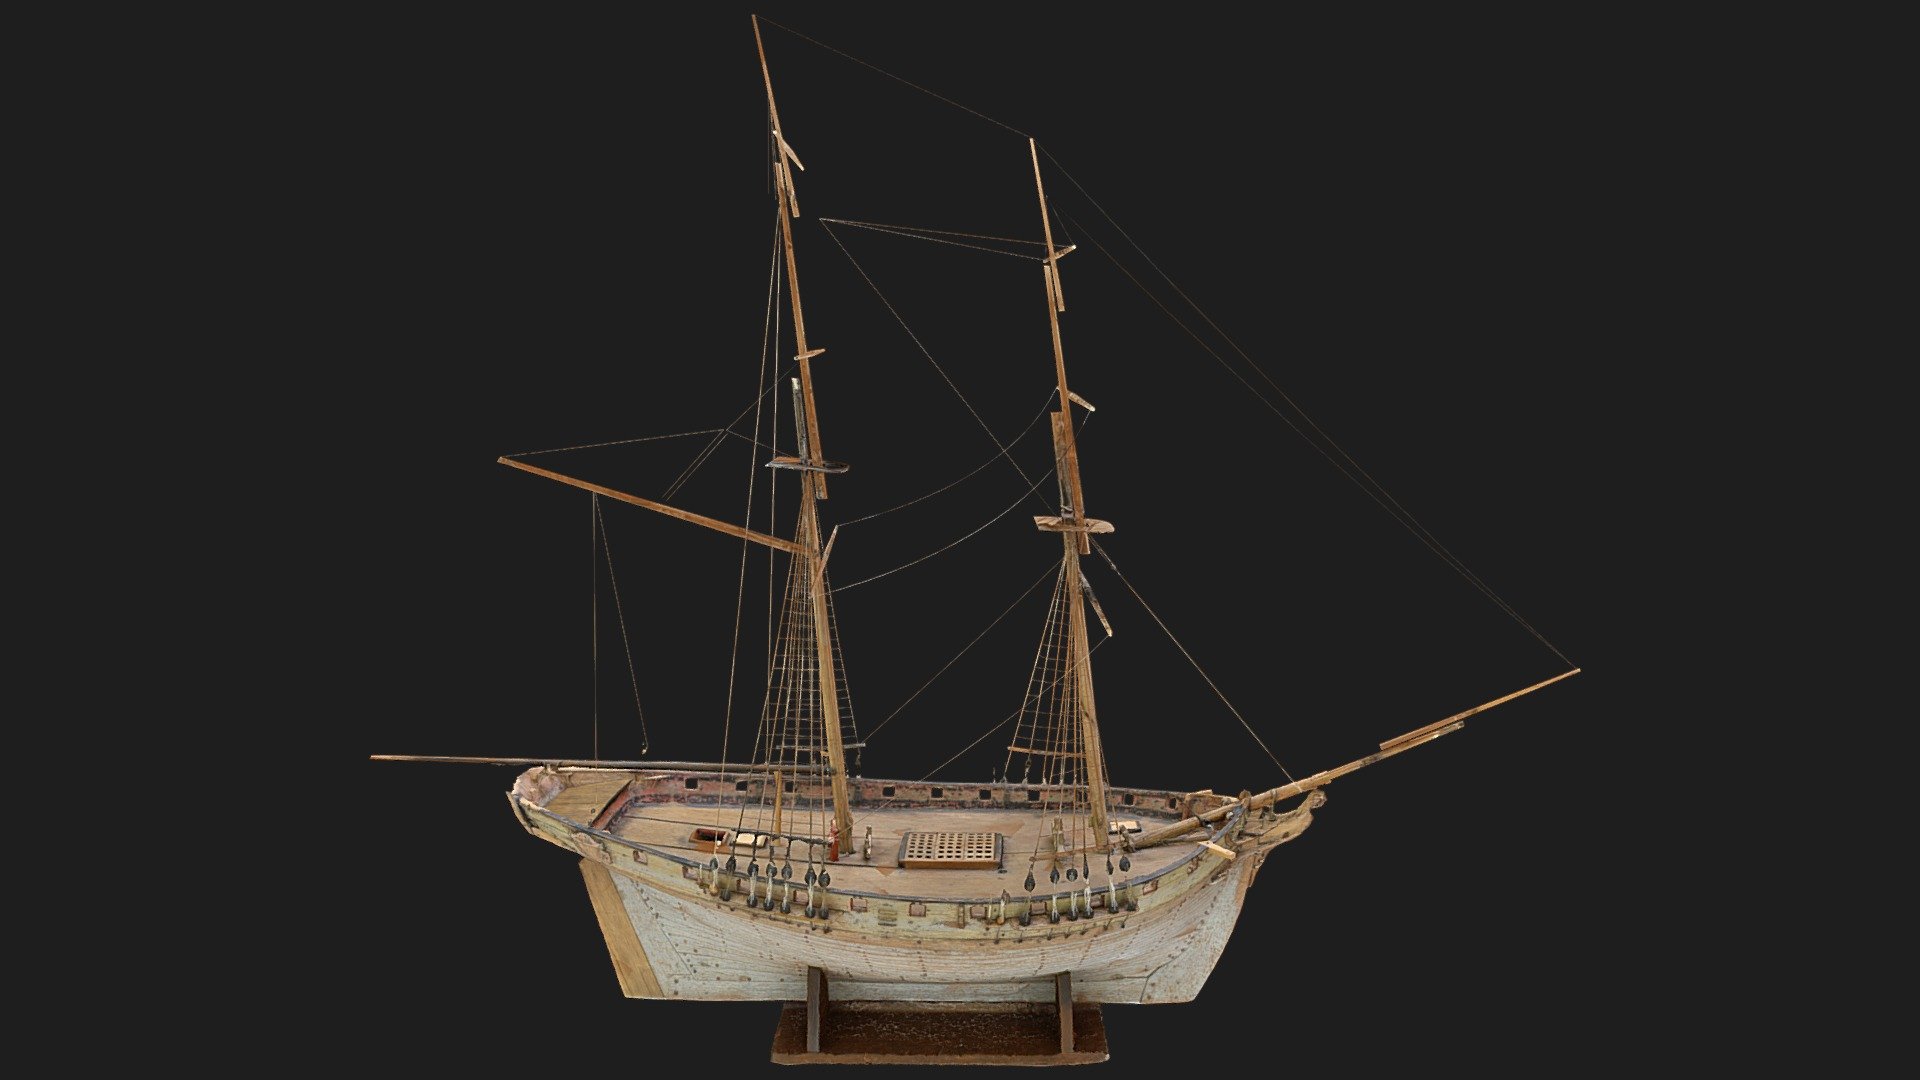 The model has had several parts removed and paint stripped back during an historic attempt at restoration, which has frustrated specific identification. Some elements are suggestive of a Mediaeval cog, especially hull dimensions, keel design and clinker build. Another comparison would be a mid-to-late-18th-century or early 19th-century merchant, or naval, brig. Brigs were two-masted, square-rigged ships which normally had a spanker sail set on the lower mainmast. The foremast was the shorter of the two masts. They were used as both naval and merchant vessels. If this ship is based on a naval vessel it would be classed as a sixth-rate (having 20-28 guns on a single deck) as there are 22 gun-ports.      



This model was brought to you with help from Museums Galleries Scotland as part of the ‘Exploring the Ship Model Collection at the McManus’ project 3d model